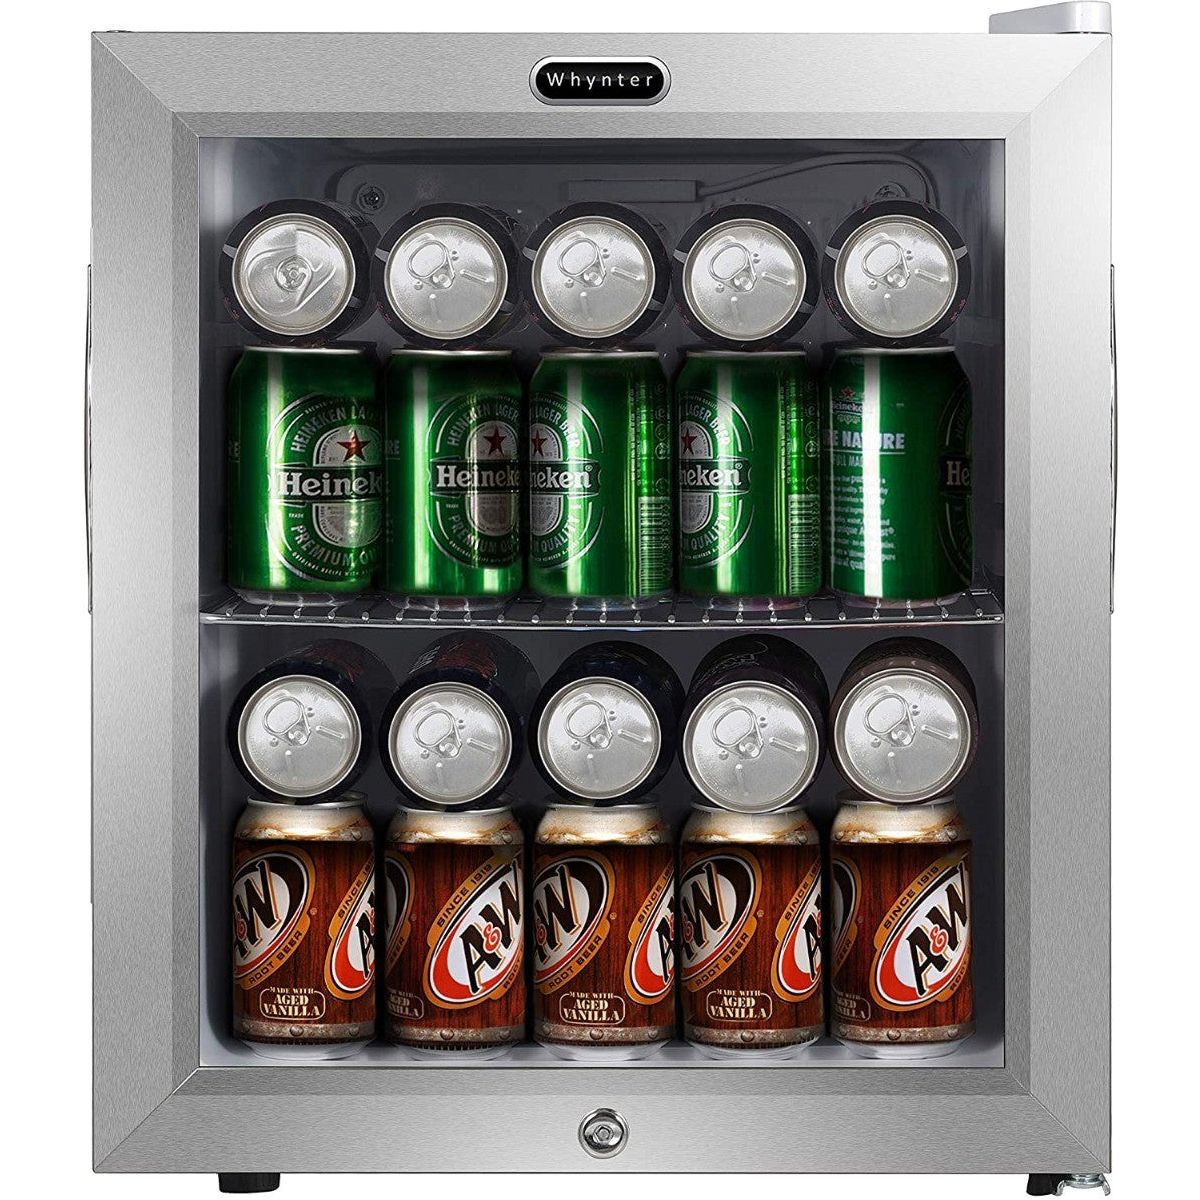 Whynter BR-062WS 62 Can Capacity Stainless Steel Beverage Refrigerator with Lock